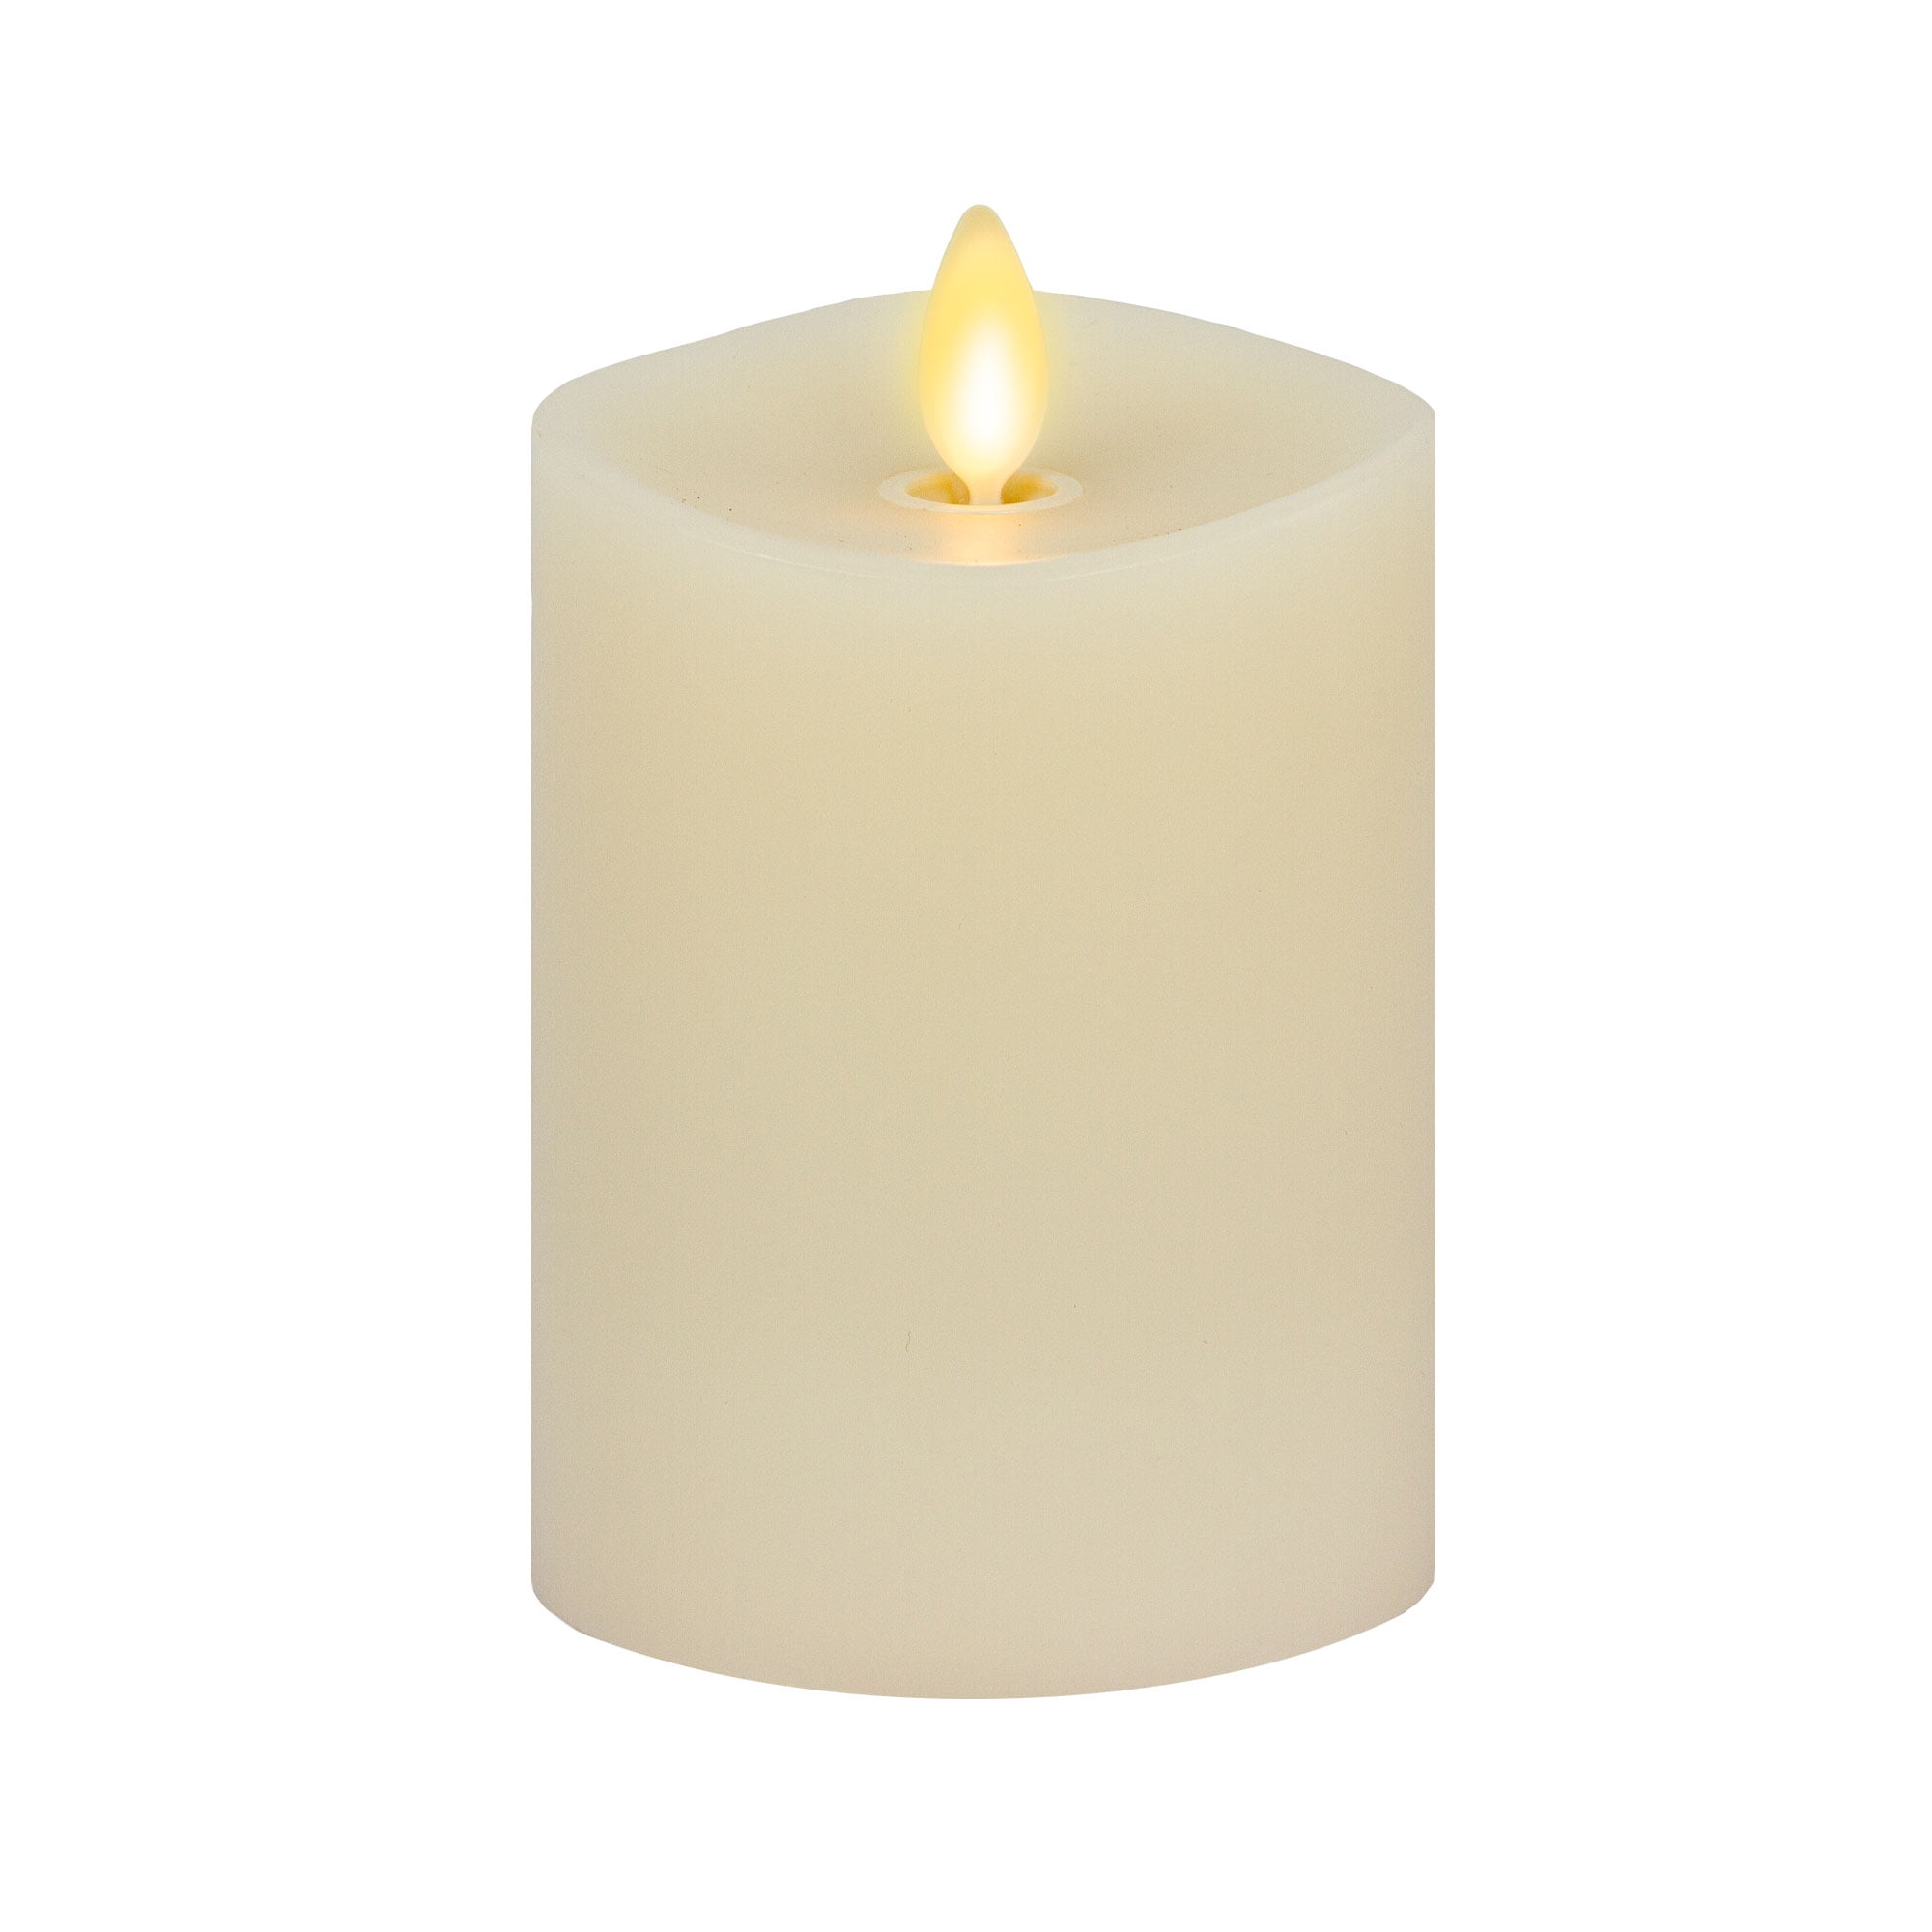 4.5" MADE FROM REAL WAX NEW LUMINARA FLAMELESS CANDLE EMBEDDED FALL LEAF 